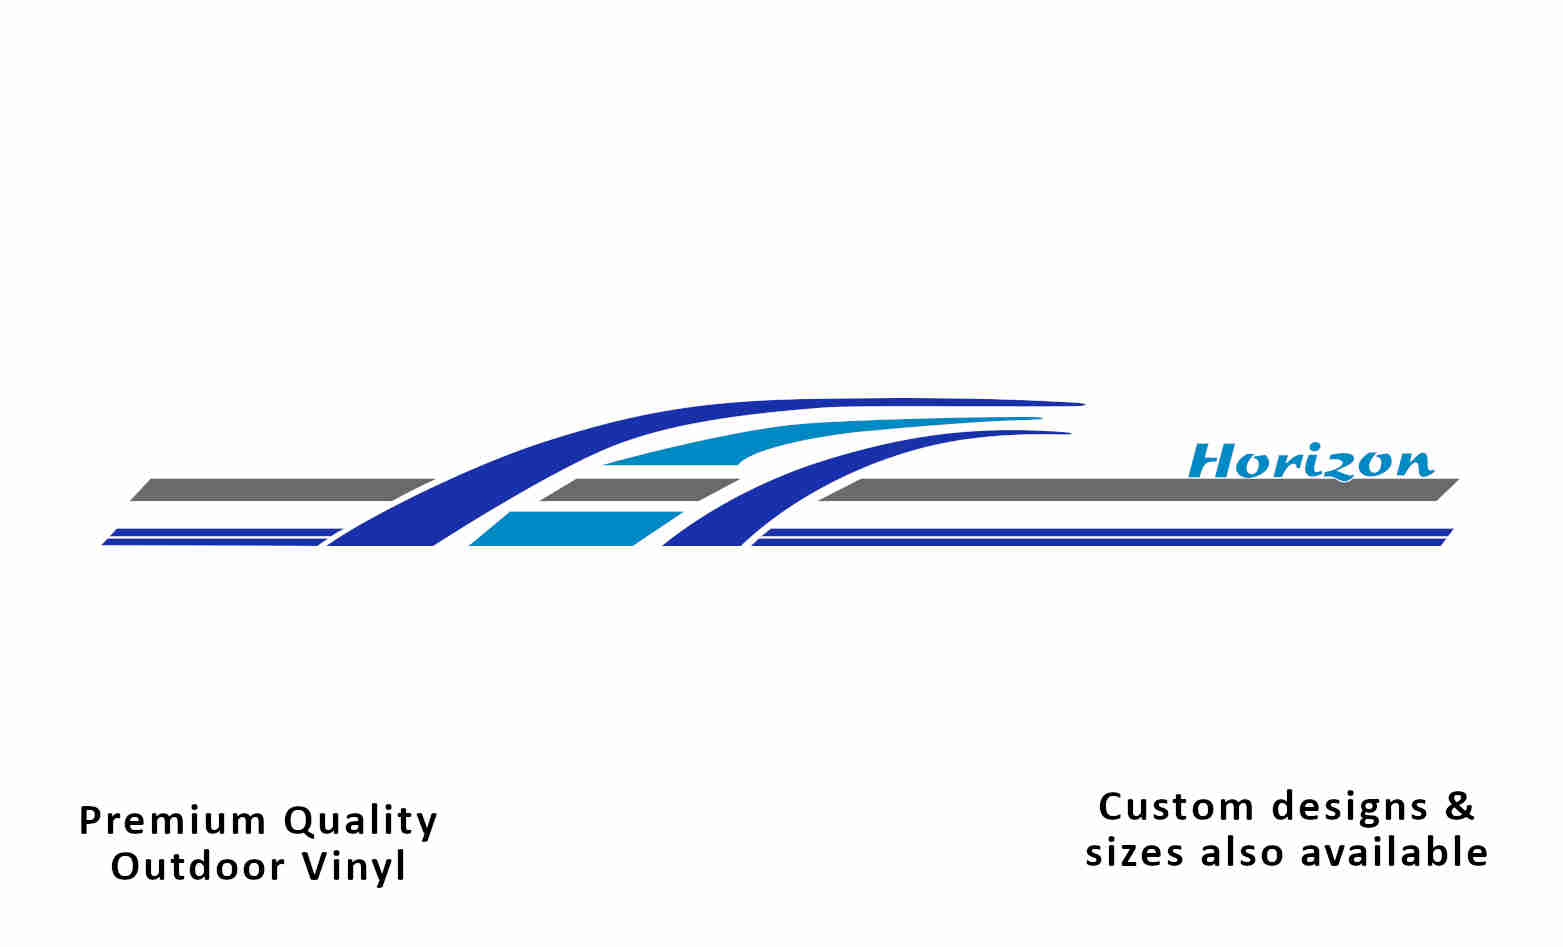 Millard horizon 2003-05 front caravan replacement decals and stickers in brilliant-blue, light-blue and silver-grey.